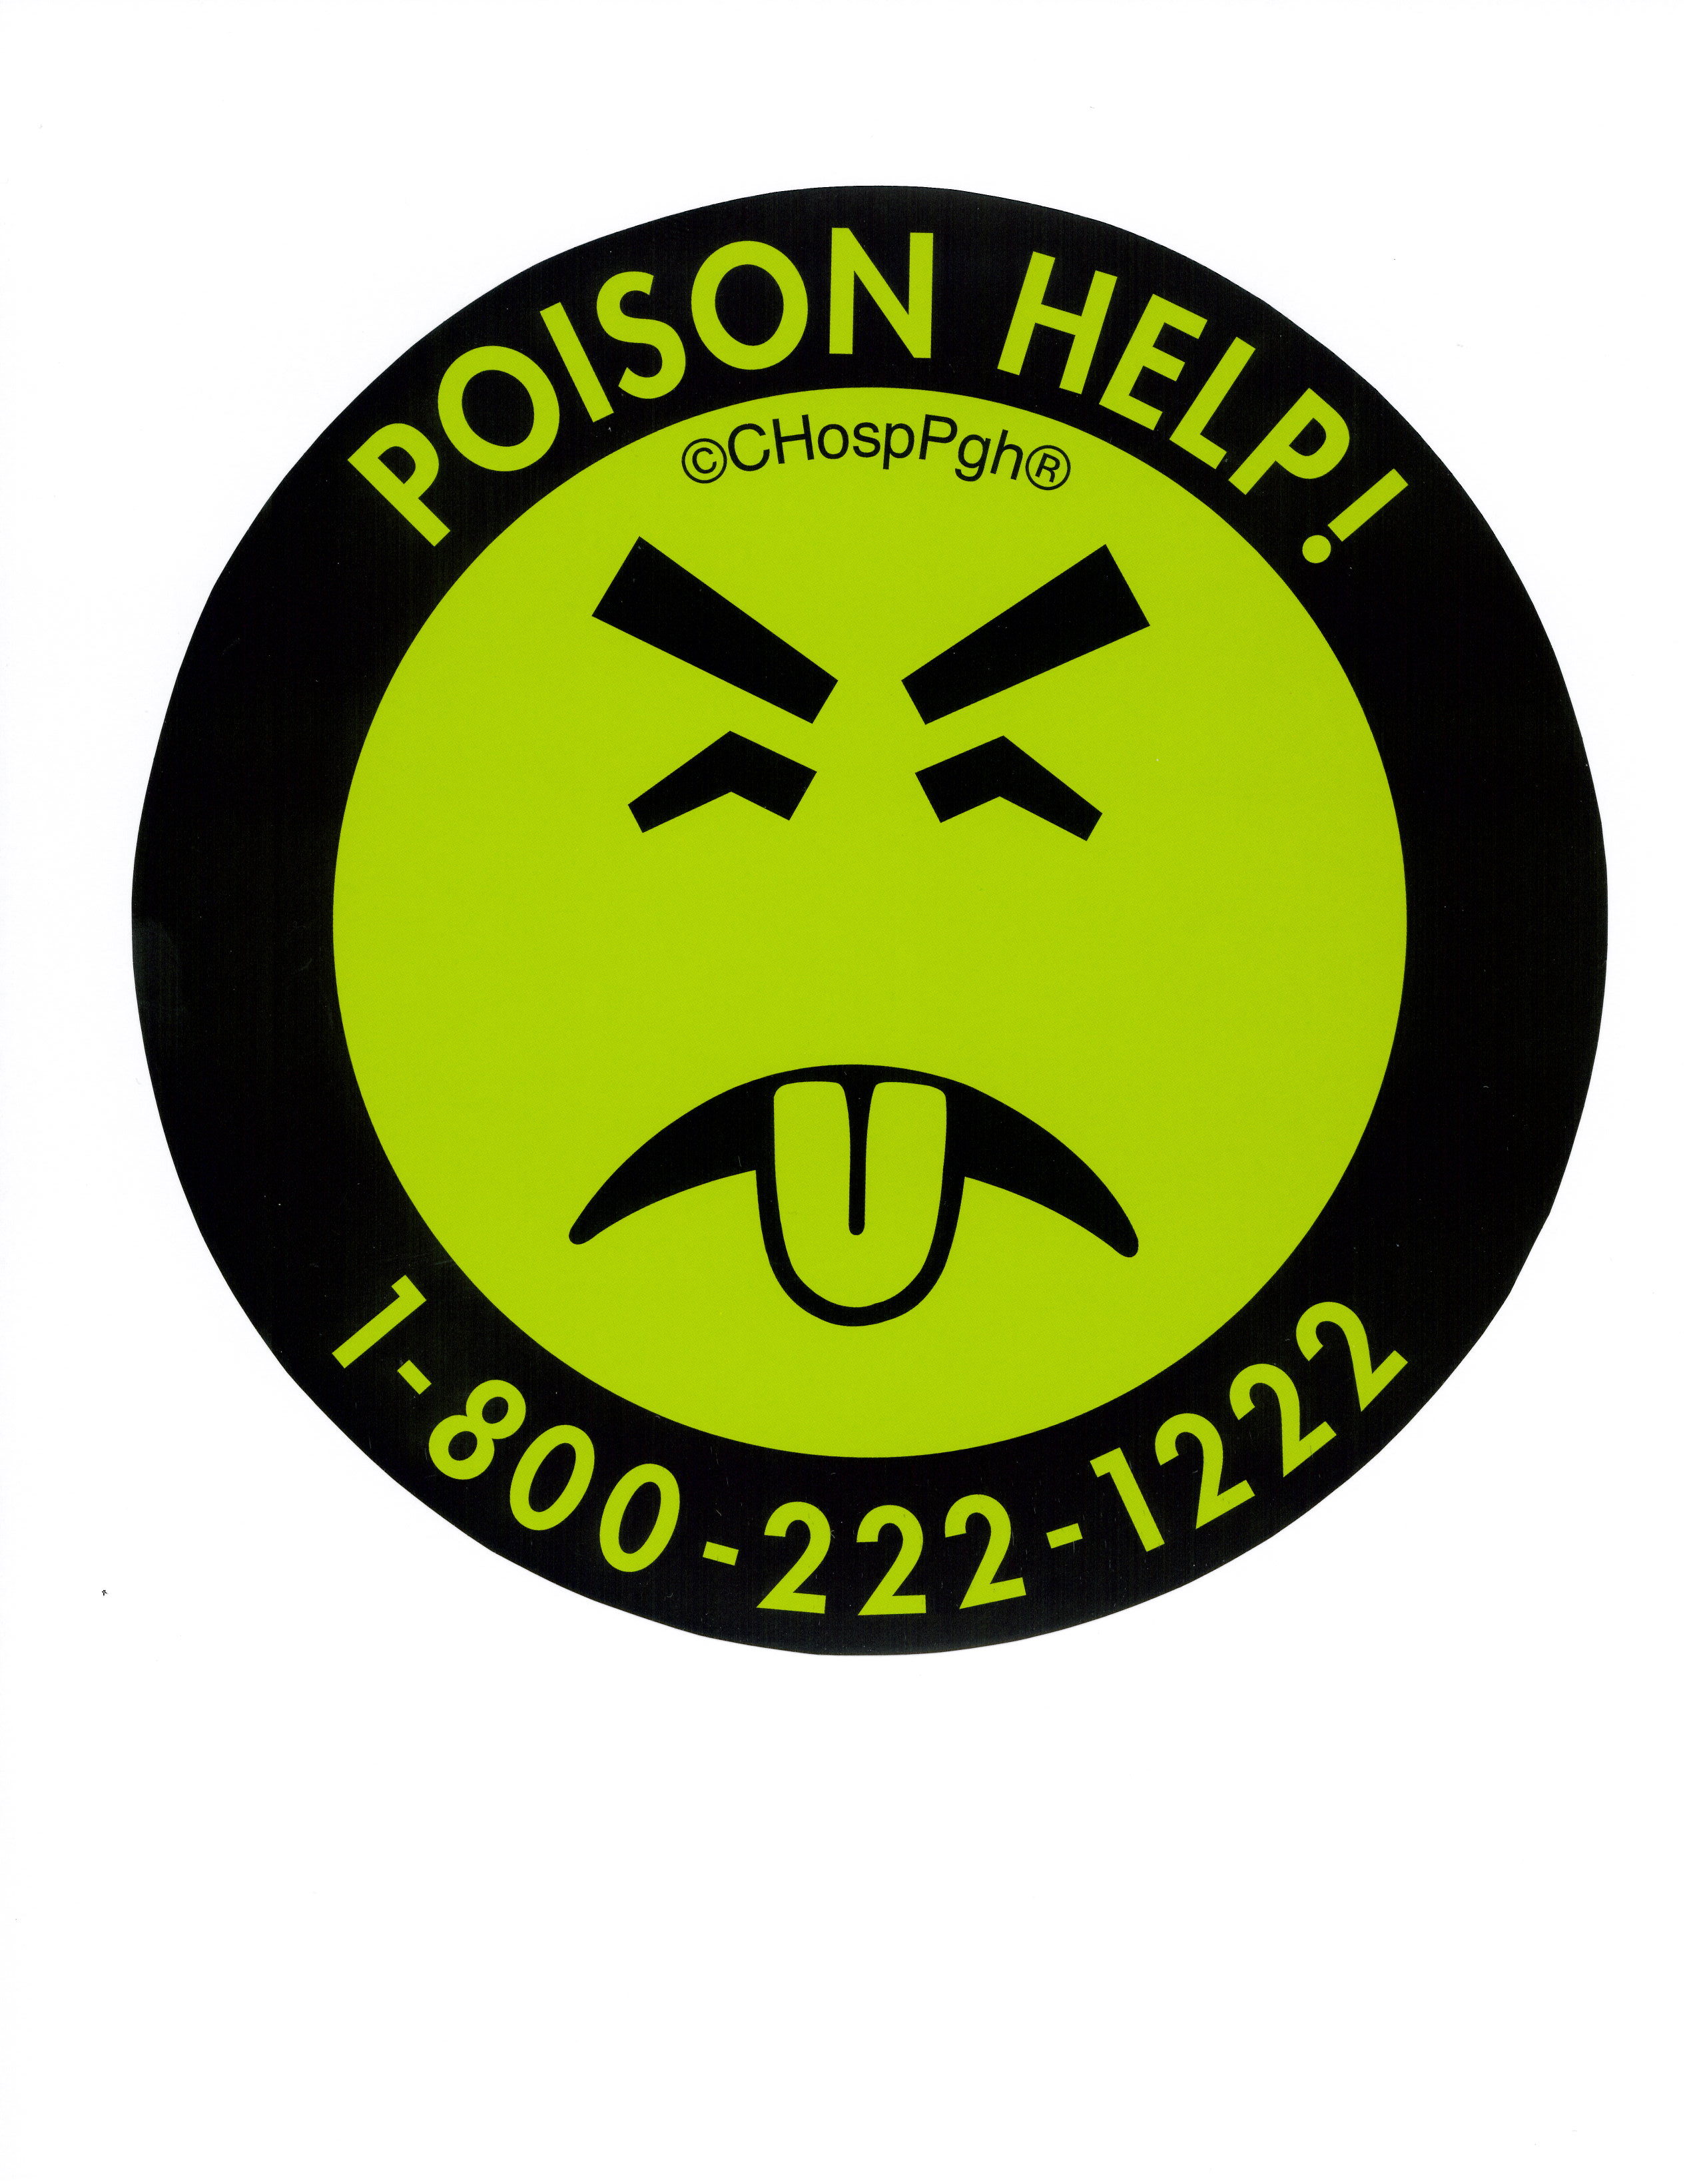 Mr. Yuk image with POISON HELP number, 1-800-222-1222